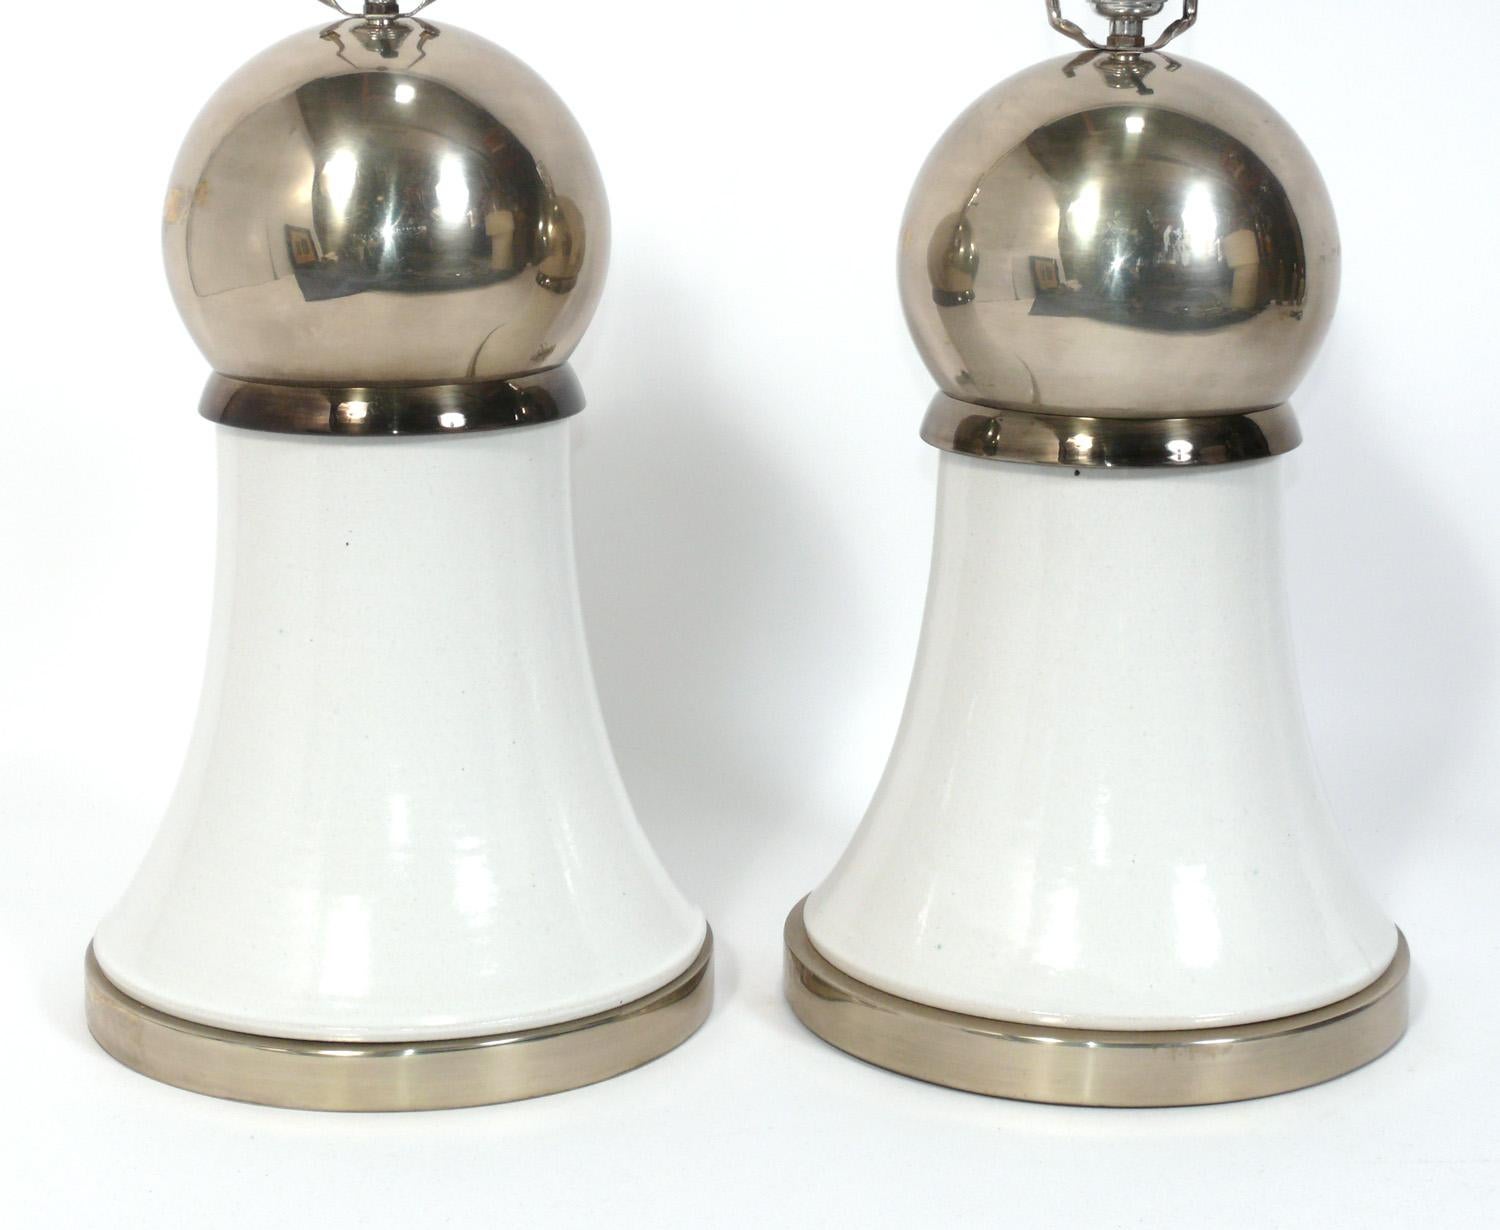 Pair of Sculptural Mid Century Ceramic Lamps in White and Chrome Glaze, attributed to Bitossi, unsigned, Italy, circa 1970s. They have been rewired and are ready to use. They are constructed of white and chrome glazed ceramic vessels on chromed